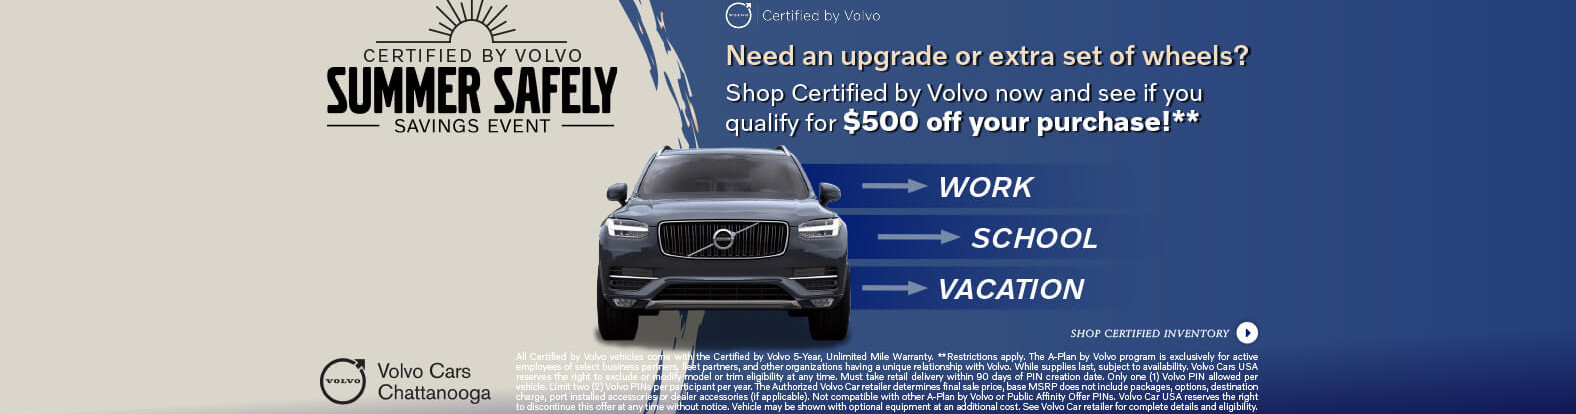 $500 off your purchase!